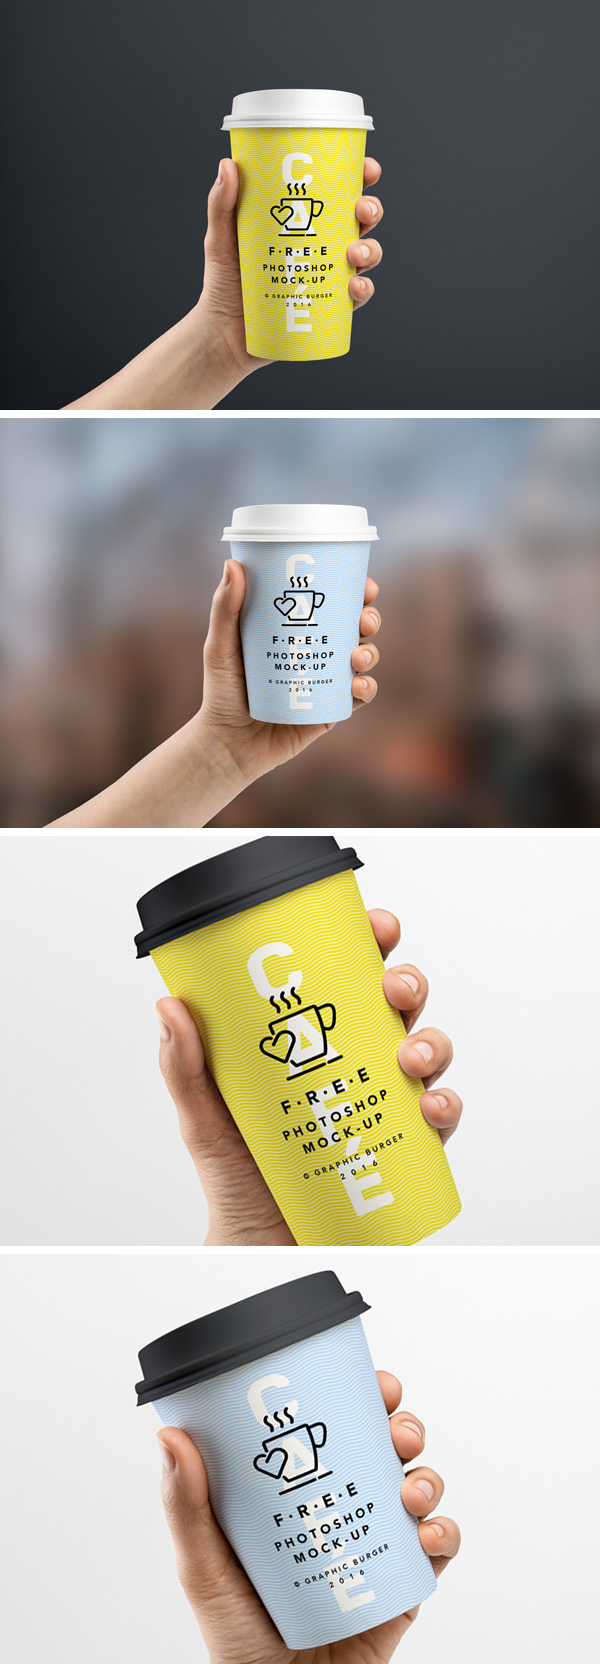 Download Coffee Cup In Hand MockUp | GraphicBurger